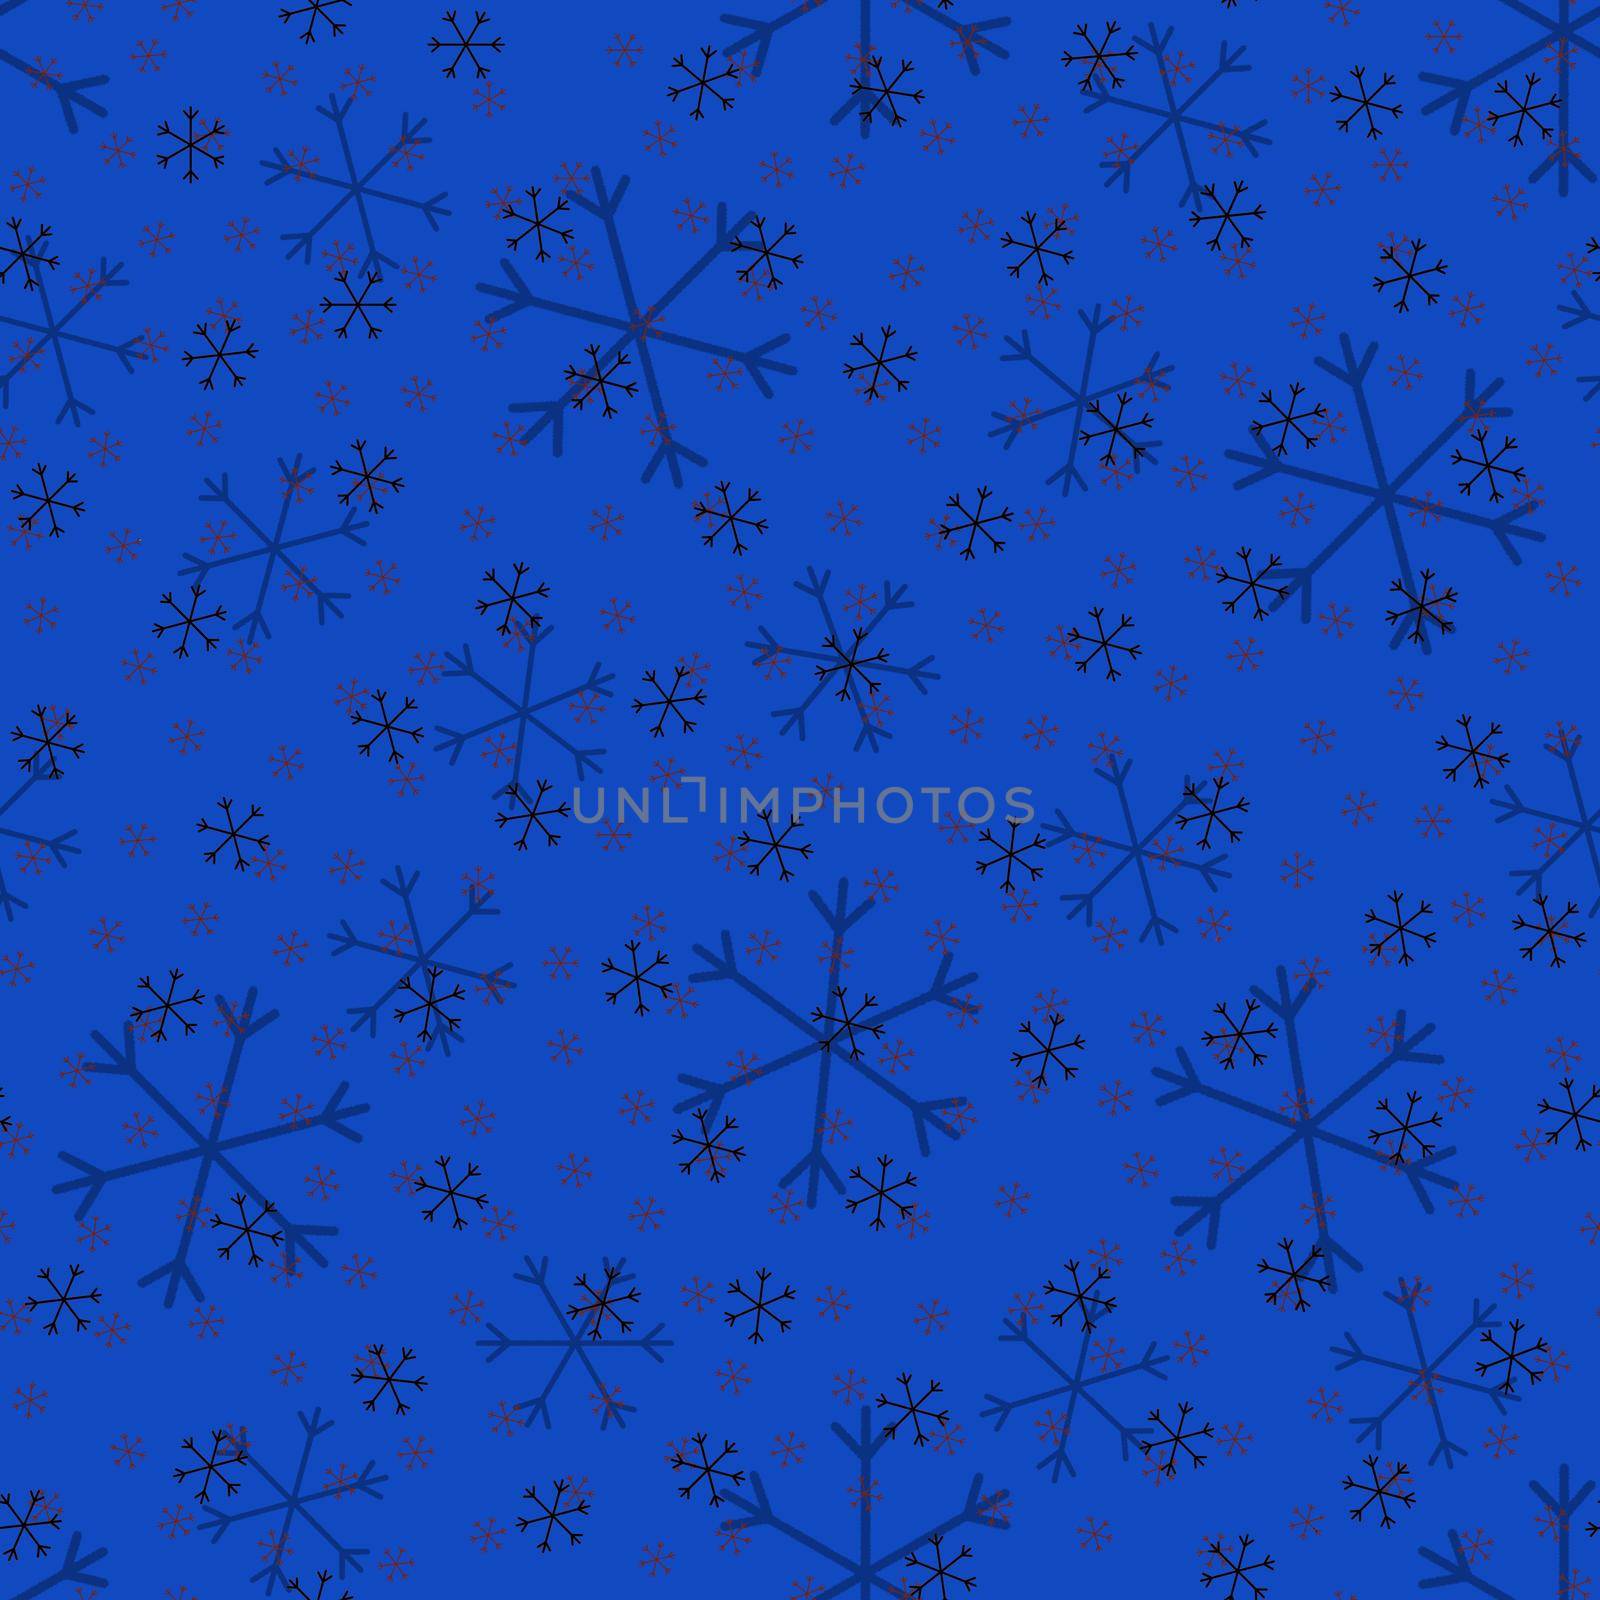 Seamless Christmas pattern doodle with hand random drawn snowflakes.Wrapping paper for presents, funny textile fabric print, design, decor, food wrap, backgrounds. new year.Raster copy.Cyan black